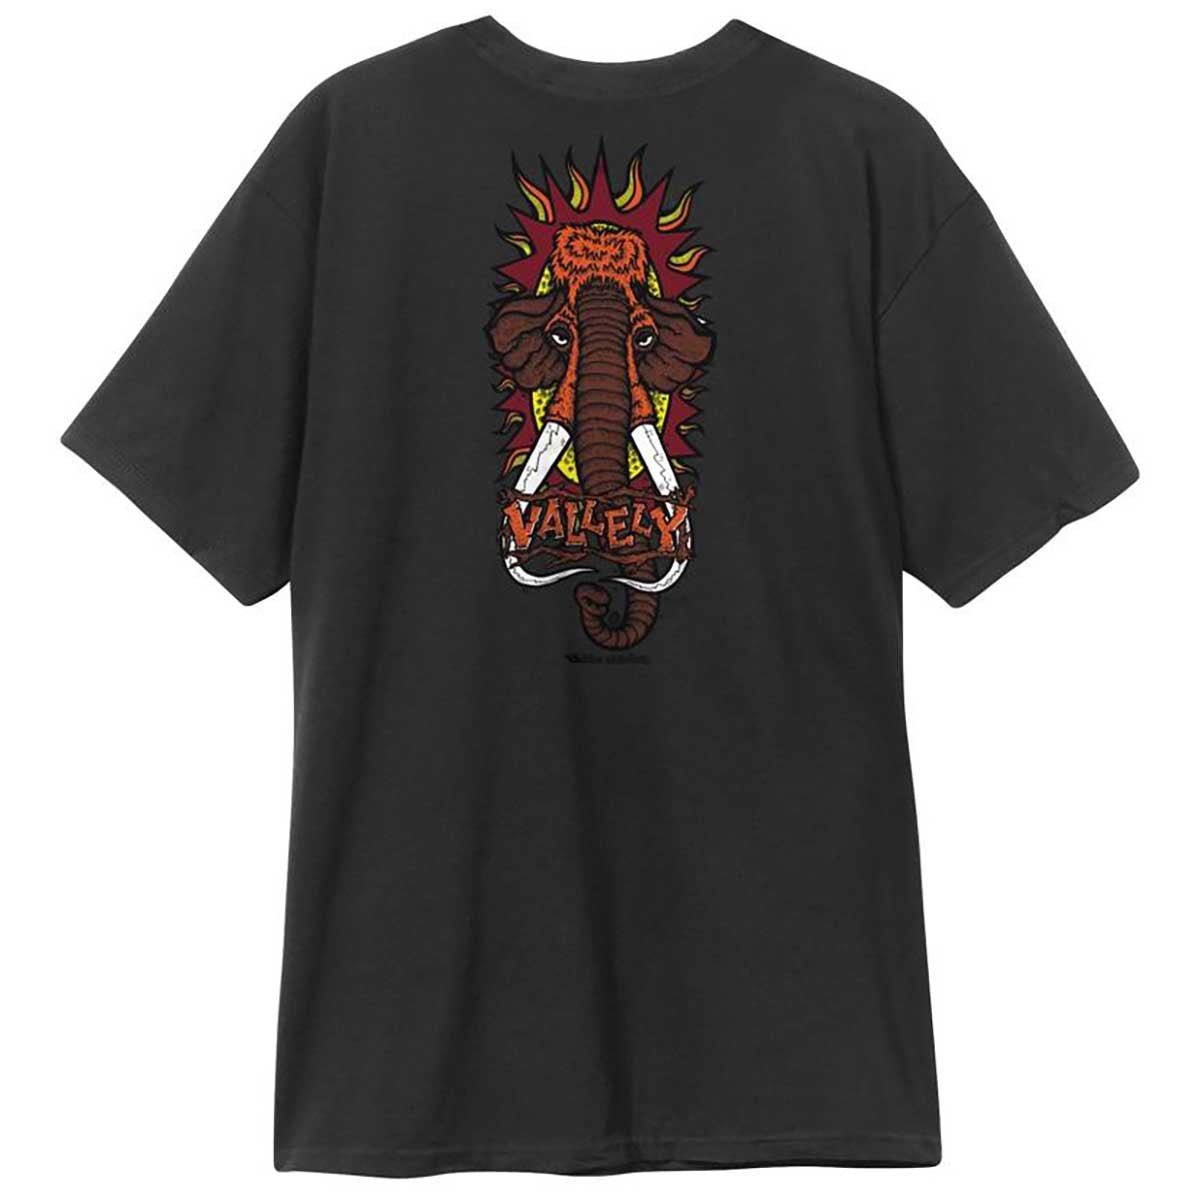 New Deal Mike Vallely Mammoth T-Shirt - Black - SkateTillDeath.com